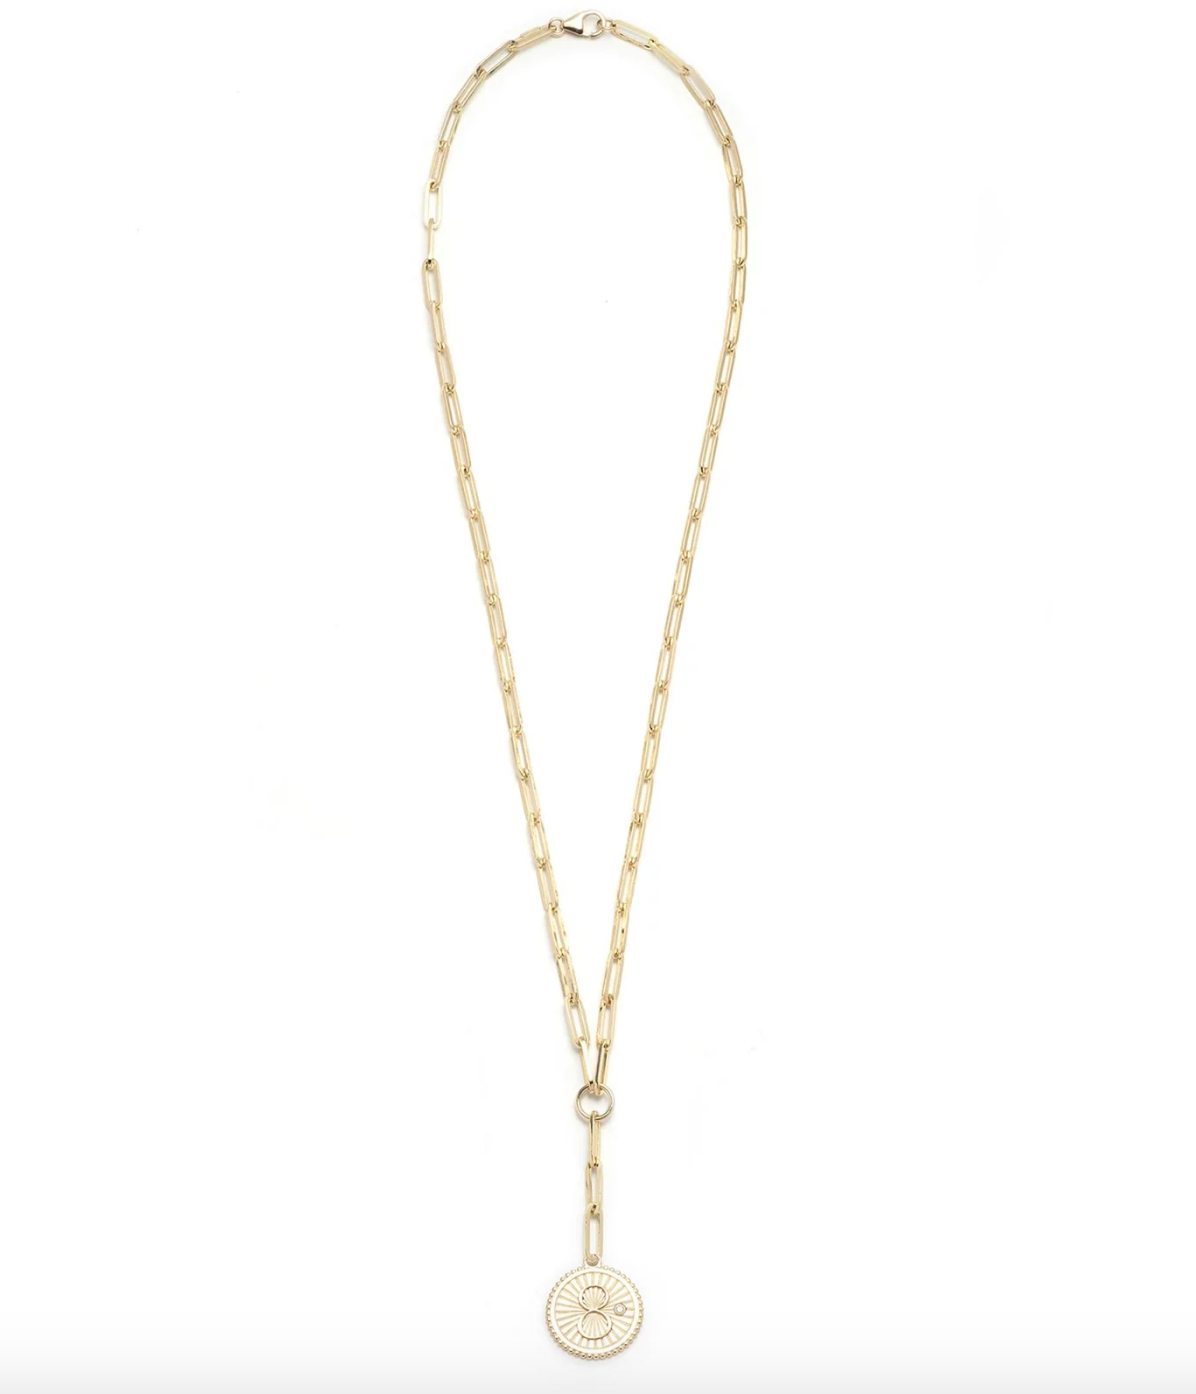 Erin Lichy's Gold Pendant Necklace